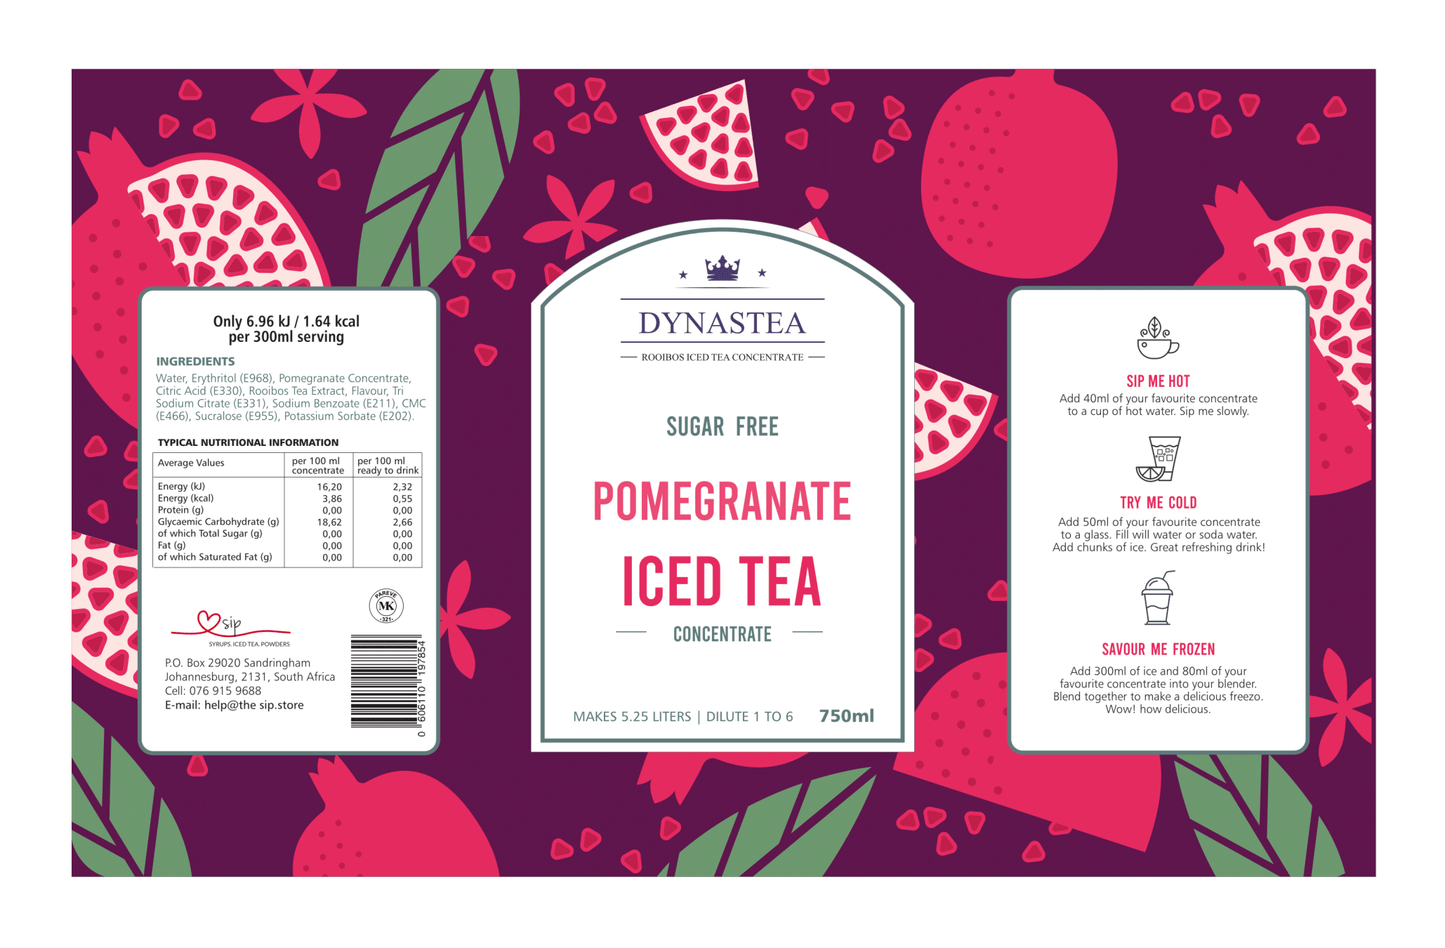 Pomegranate Iced Tea Concentrate